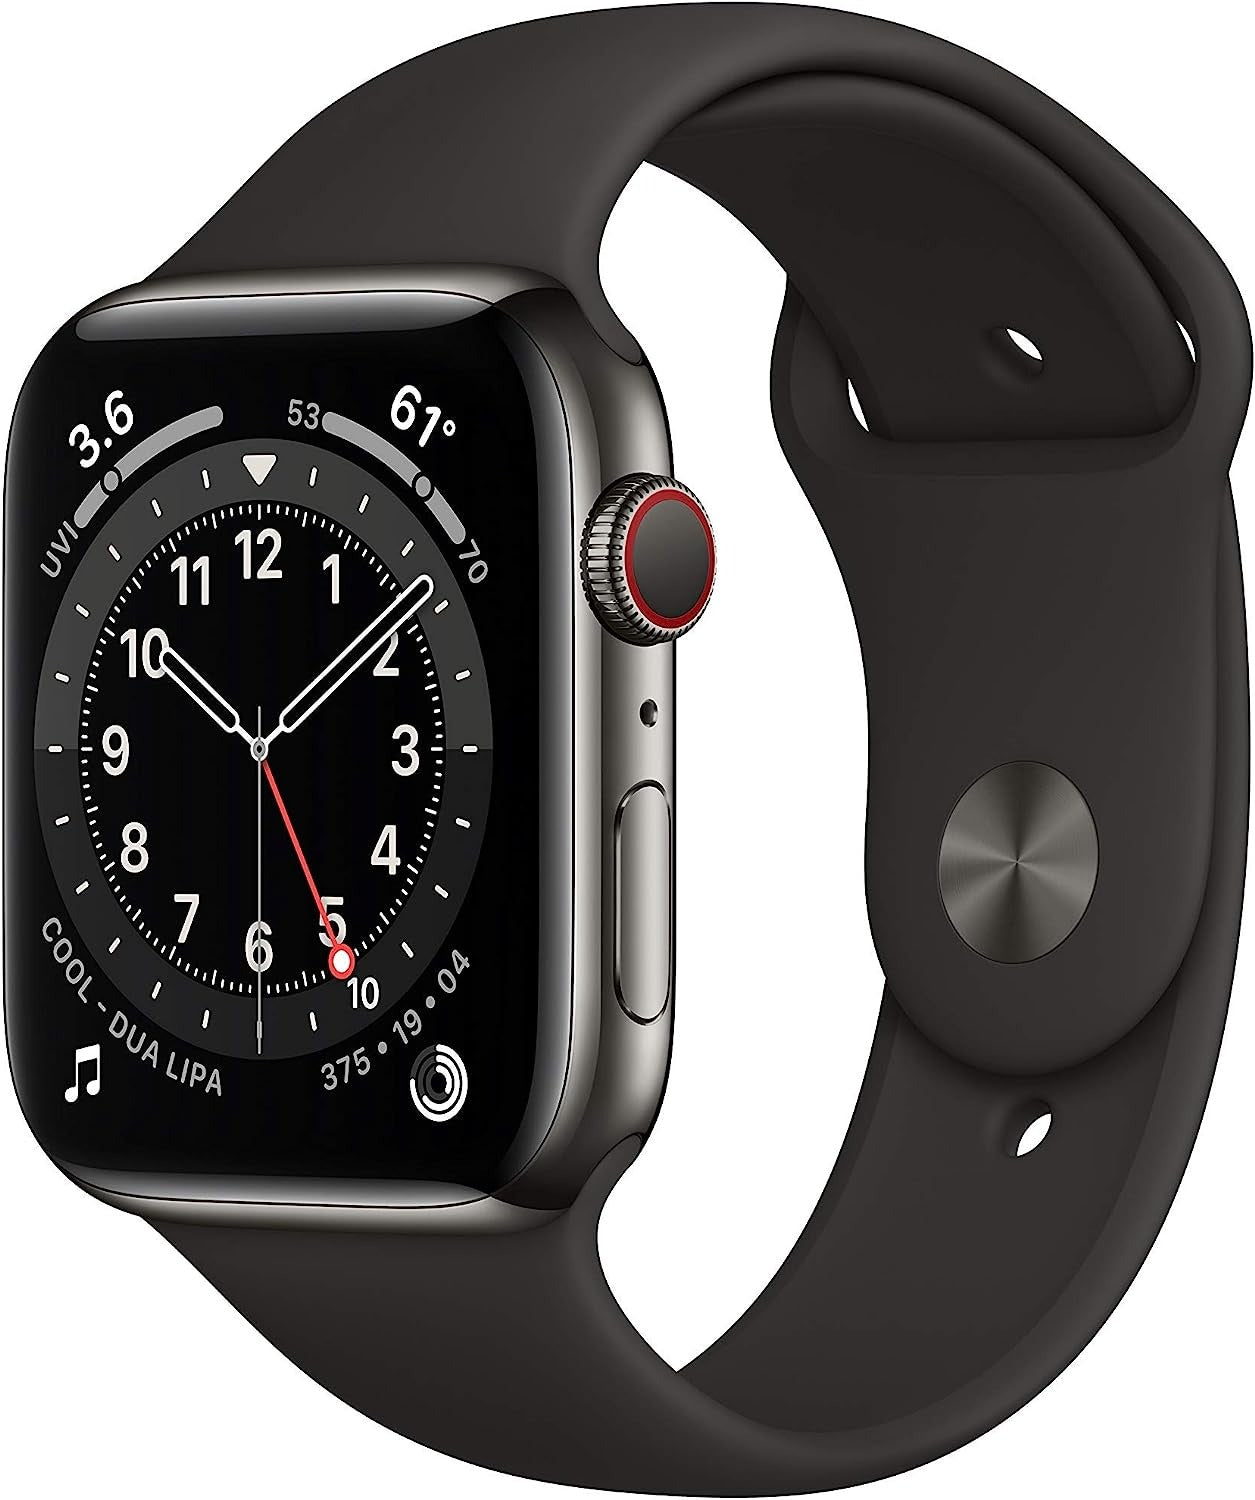 Apple Watch Series 6 (GPS + LTE) 44mm Graphite Stainless Steel Case &amp; Black Sport Band (Used)